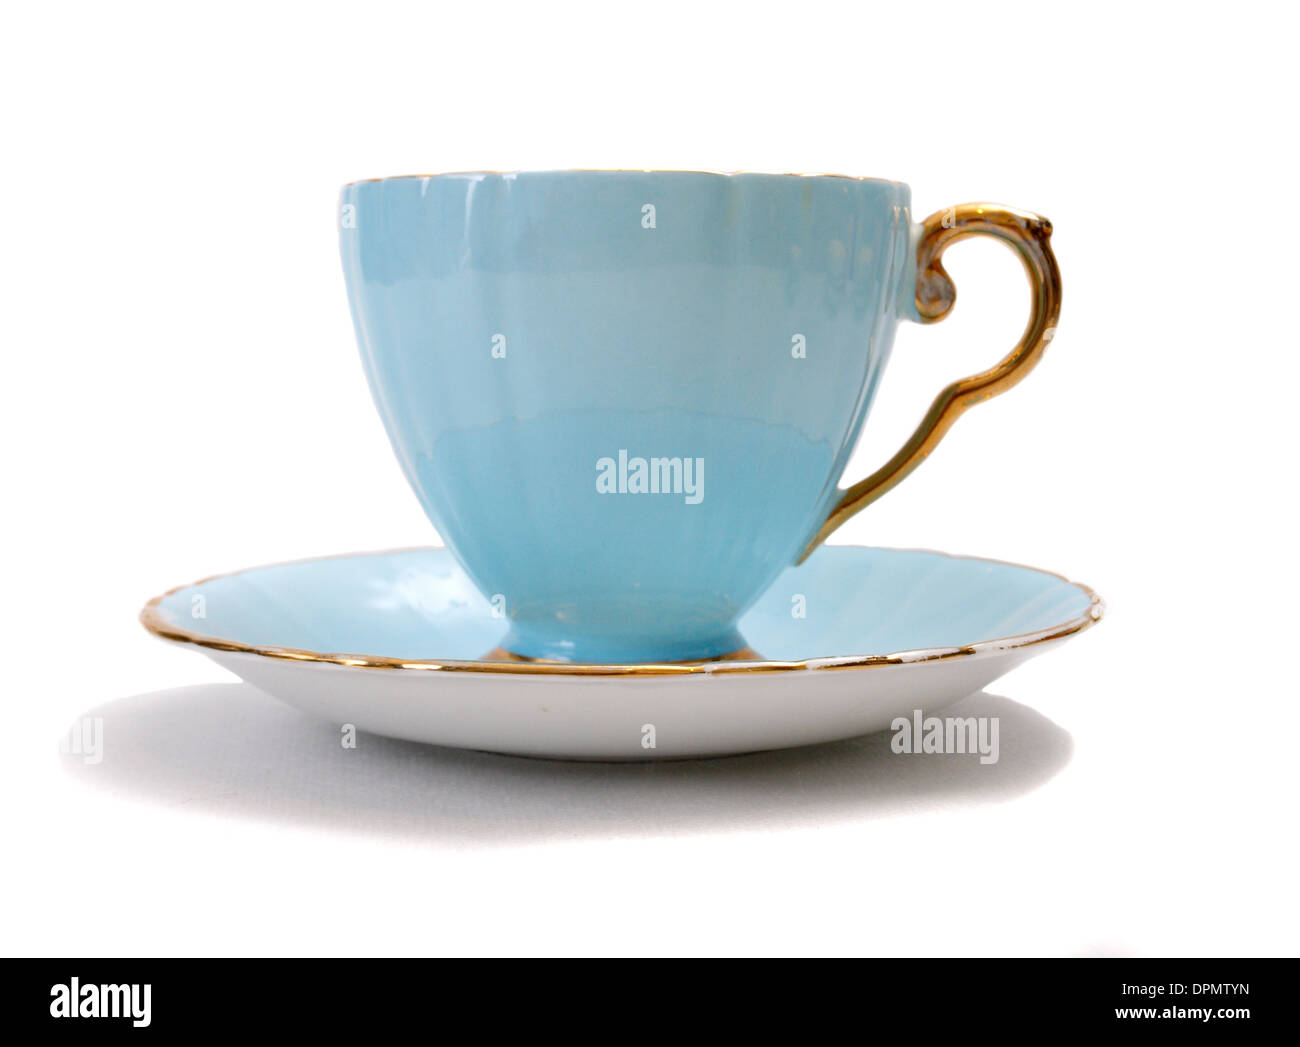 Fancy Cup & Saucer Isolated Stock Photo by ©hafiz.ismail 34421107